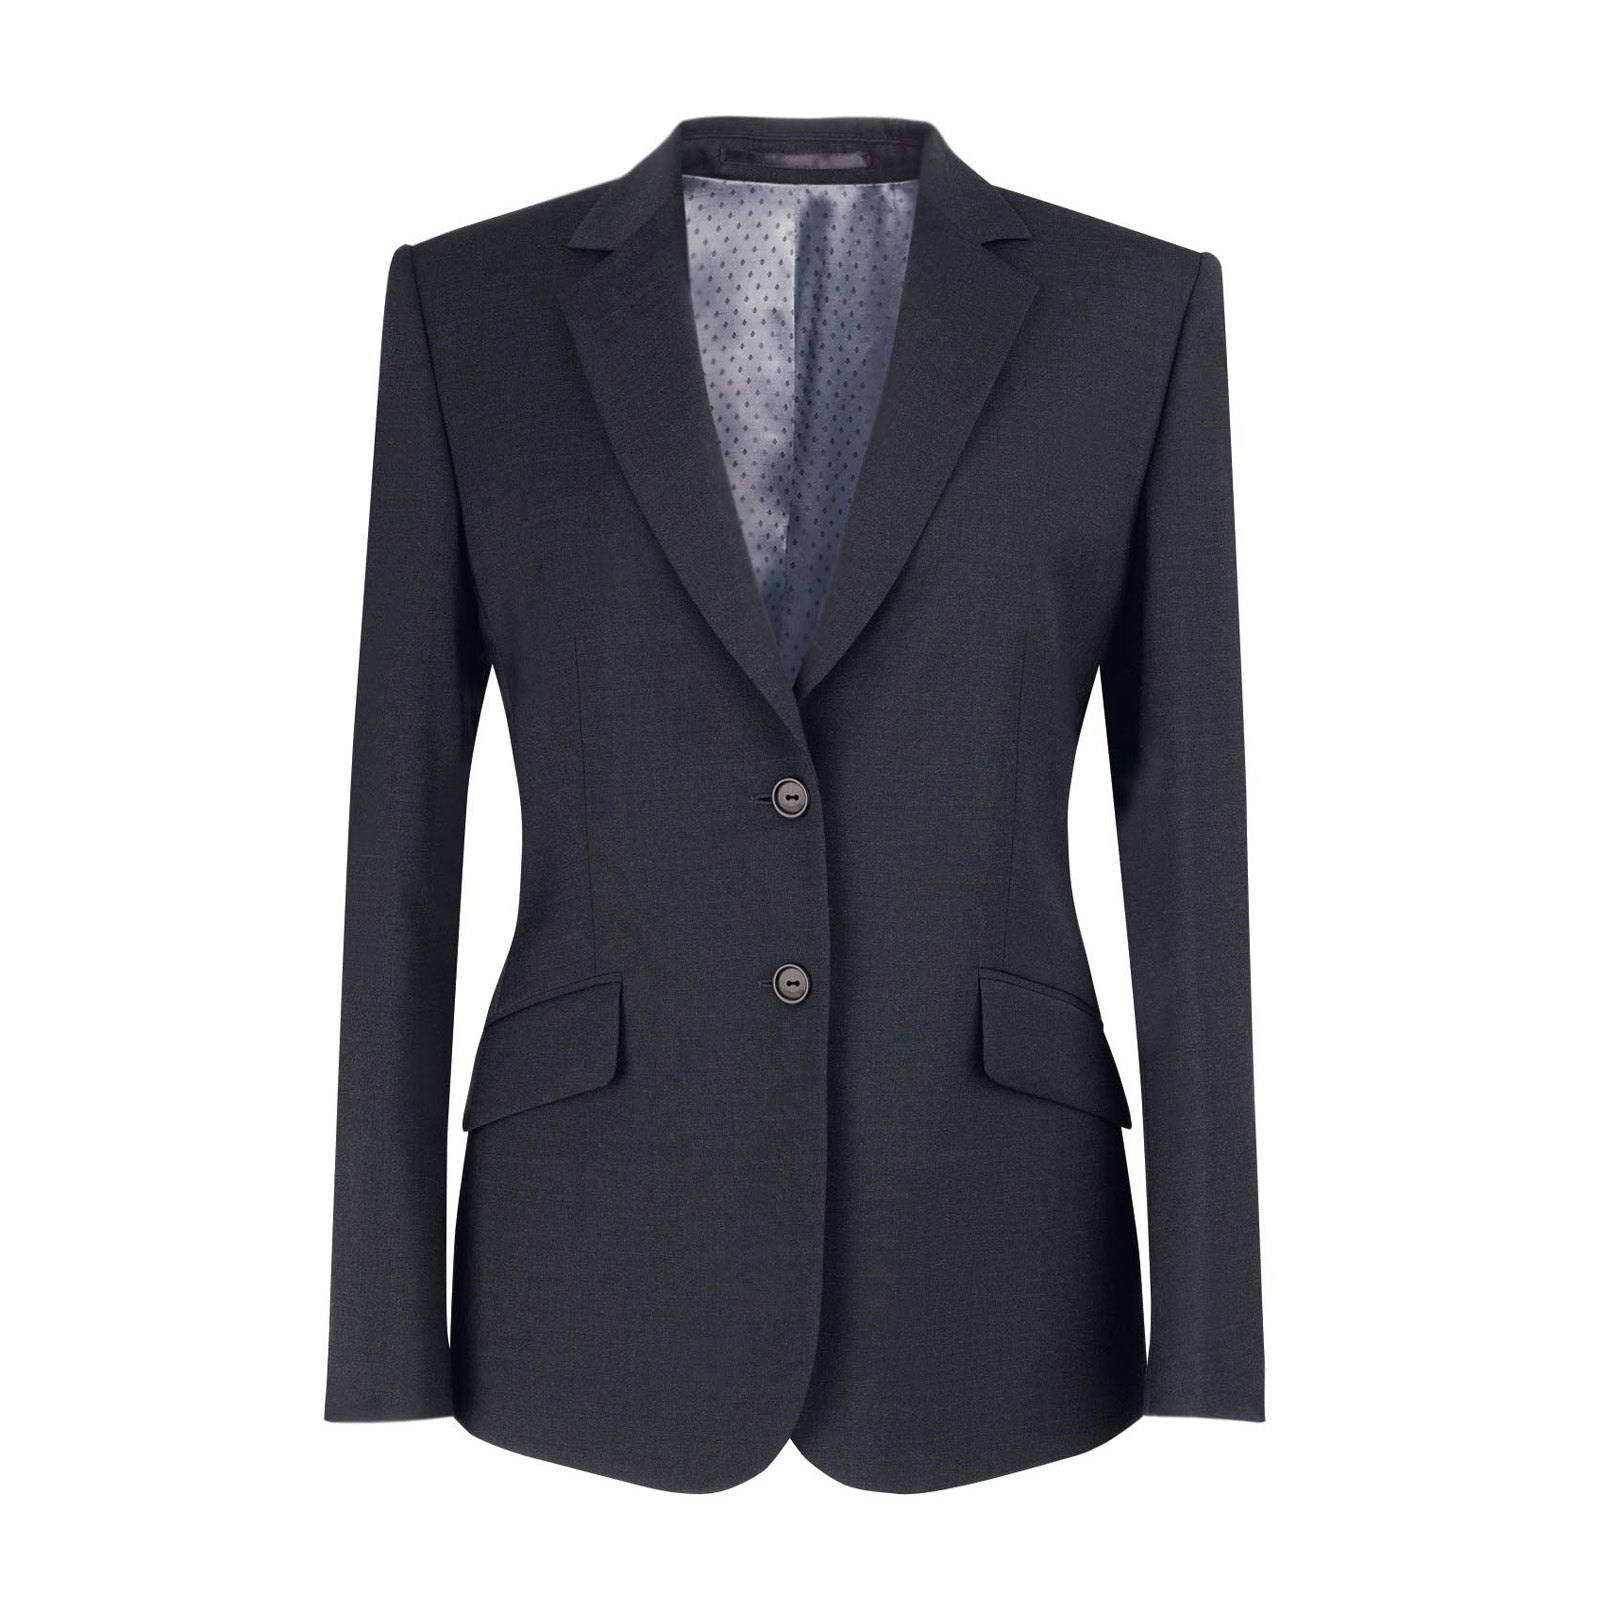 Photo of Brook Taverner Hebe Classic Fit Jacket Charcoal